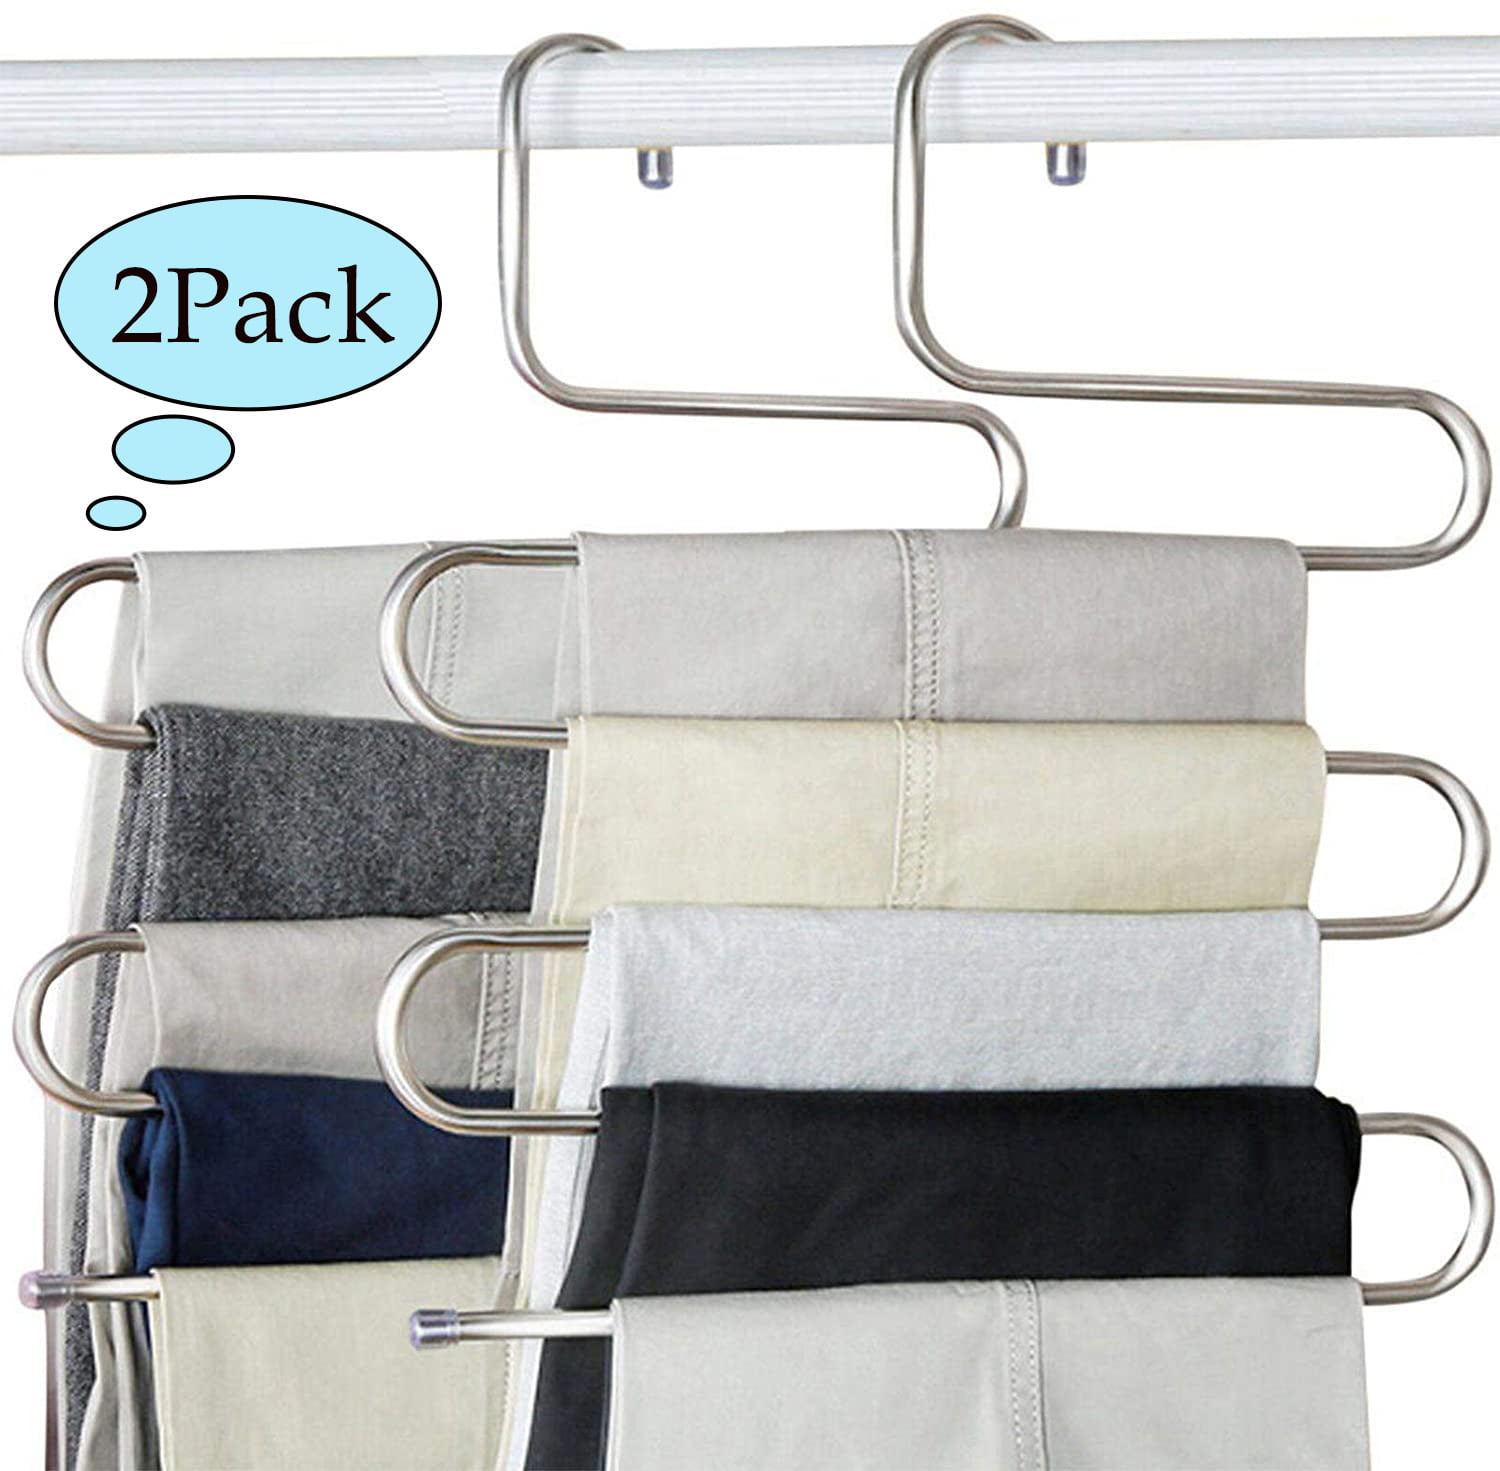 US Stainless Steel Clothes Hangers For Dress Shirt Pants Stainless Steel Metal 